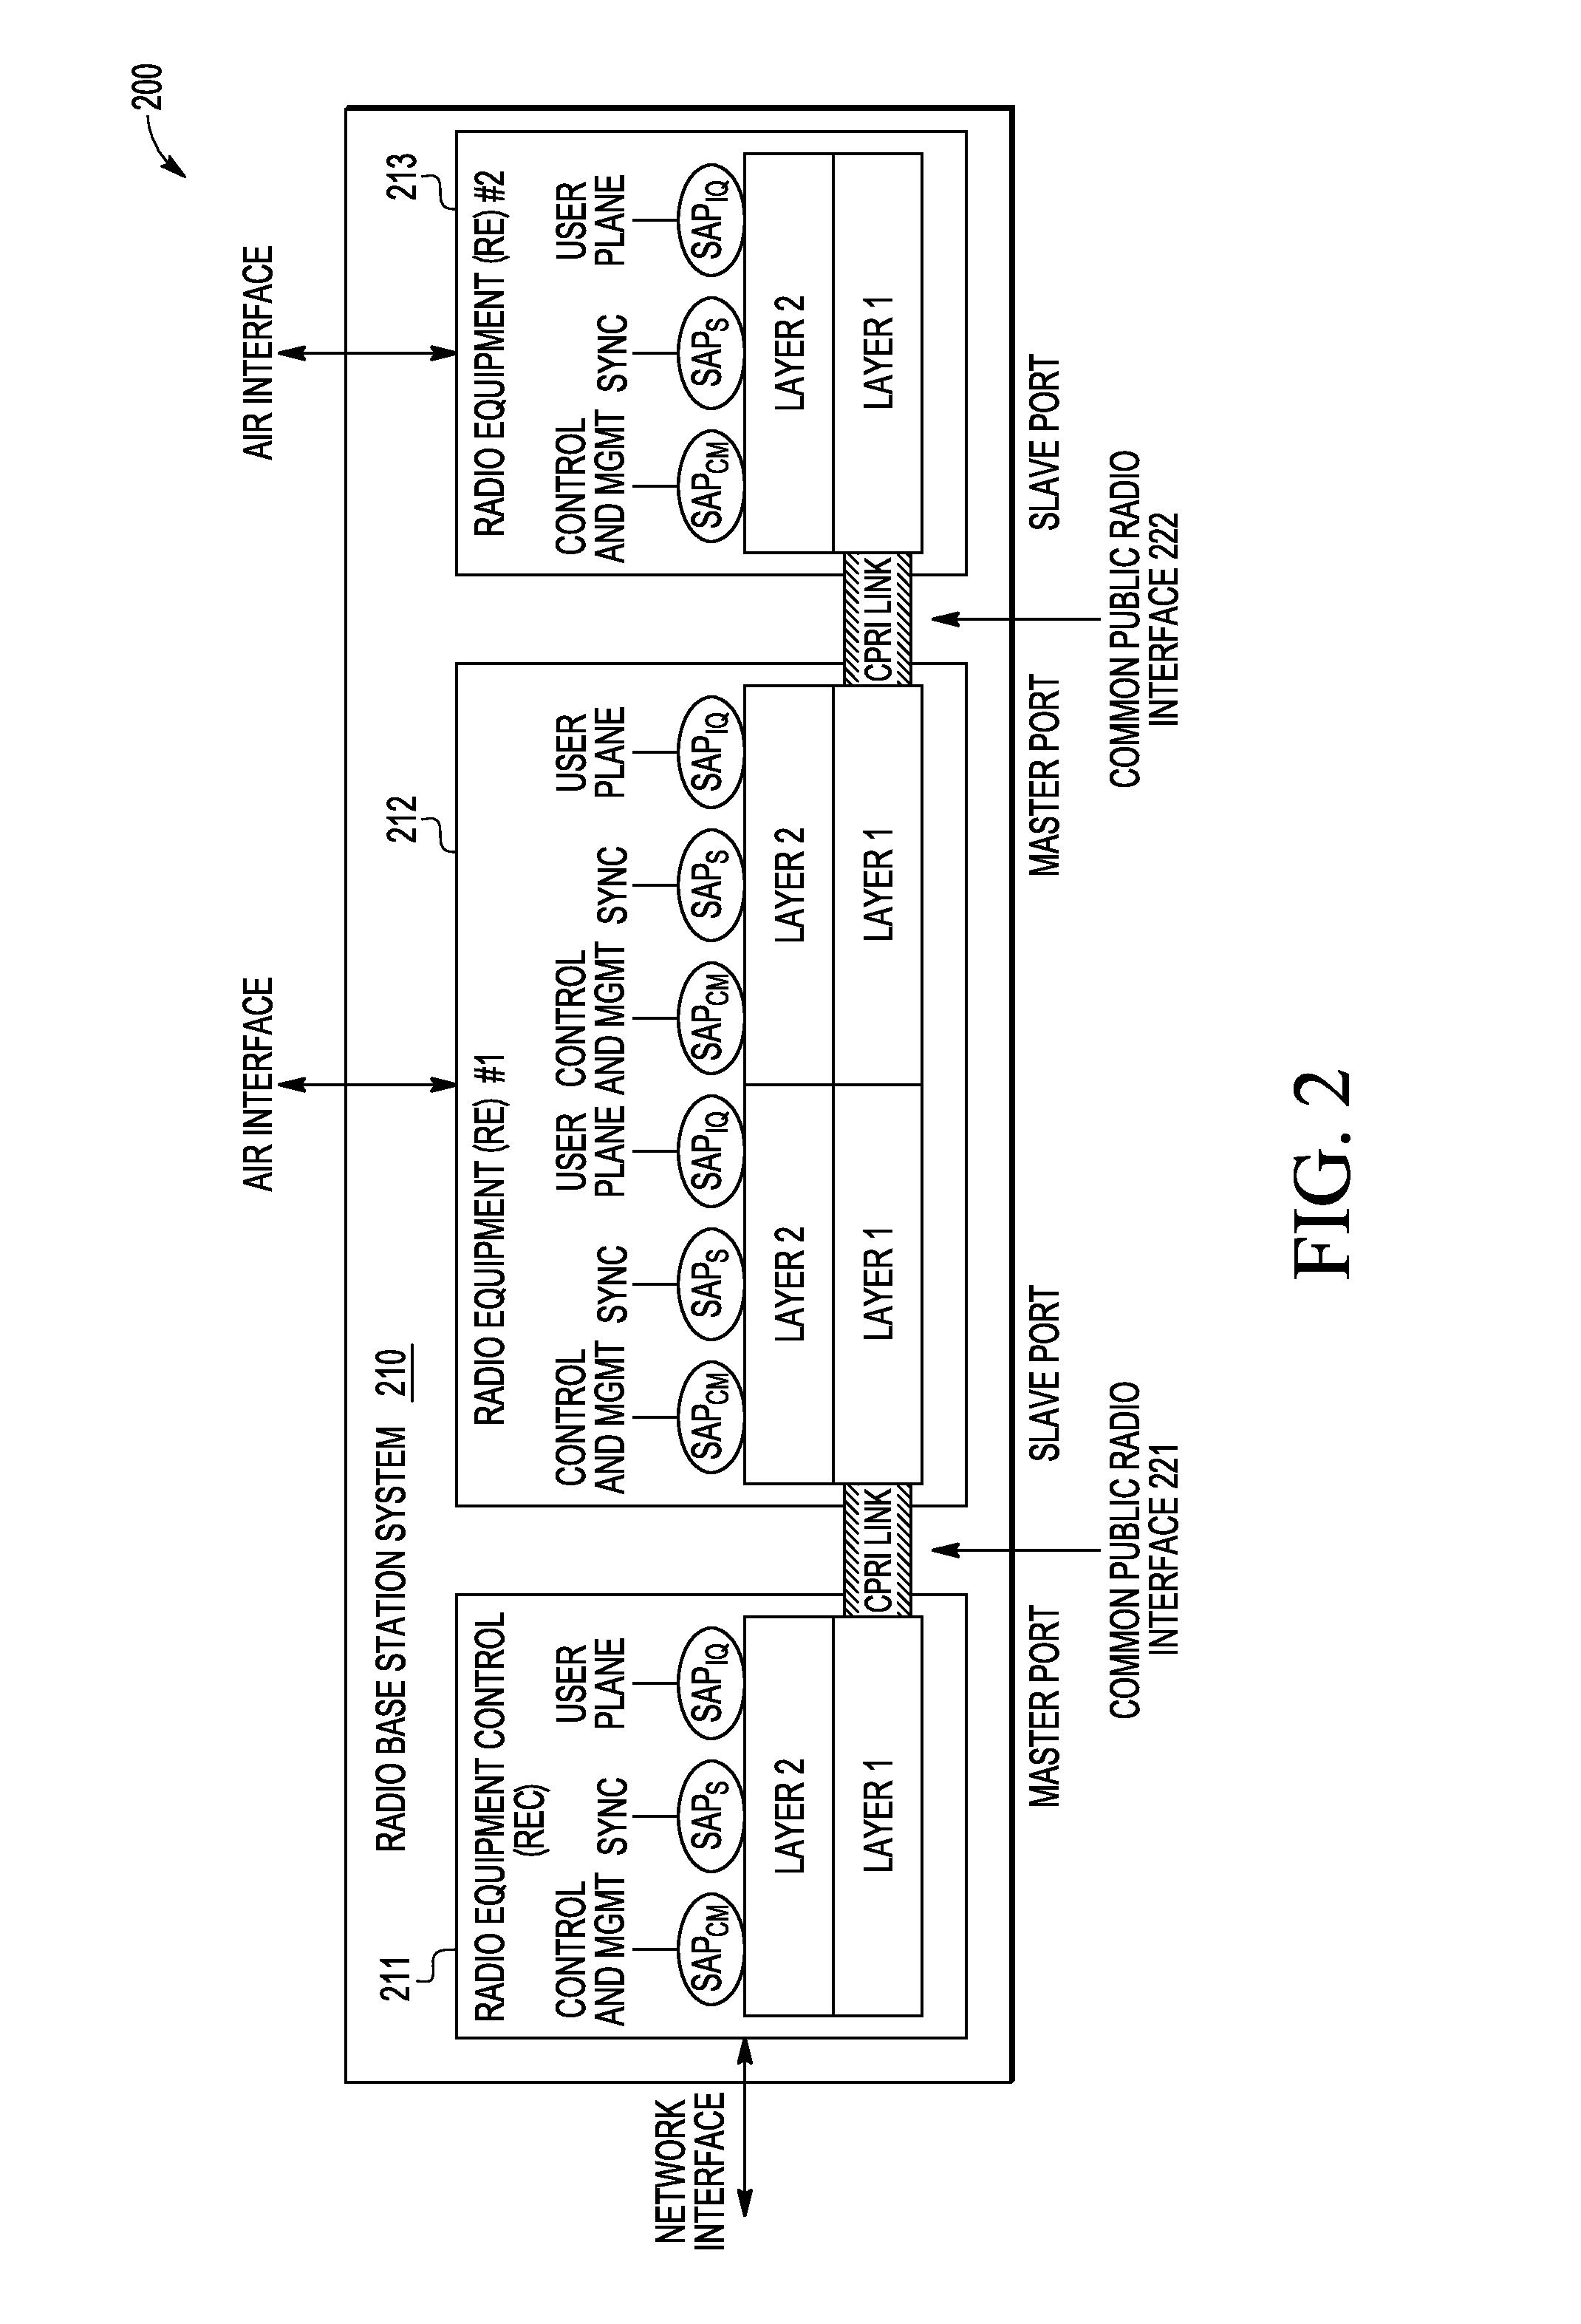 Method and System for Automatically Controlling the Insertion of Control Word in CPRI Daisy Chain Configuration